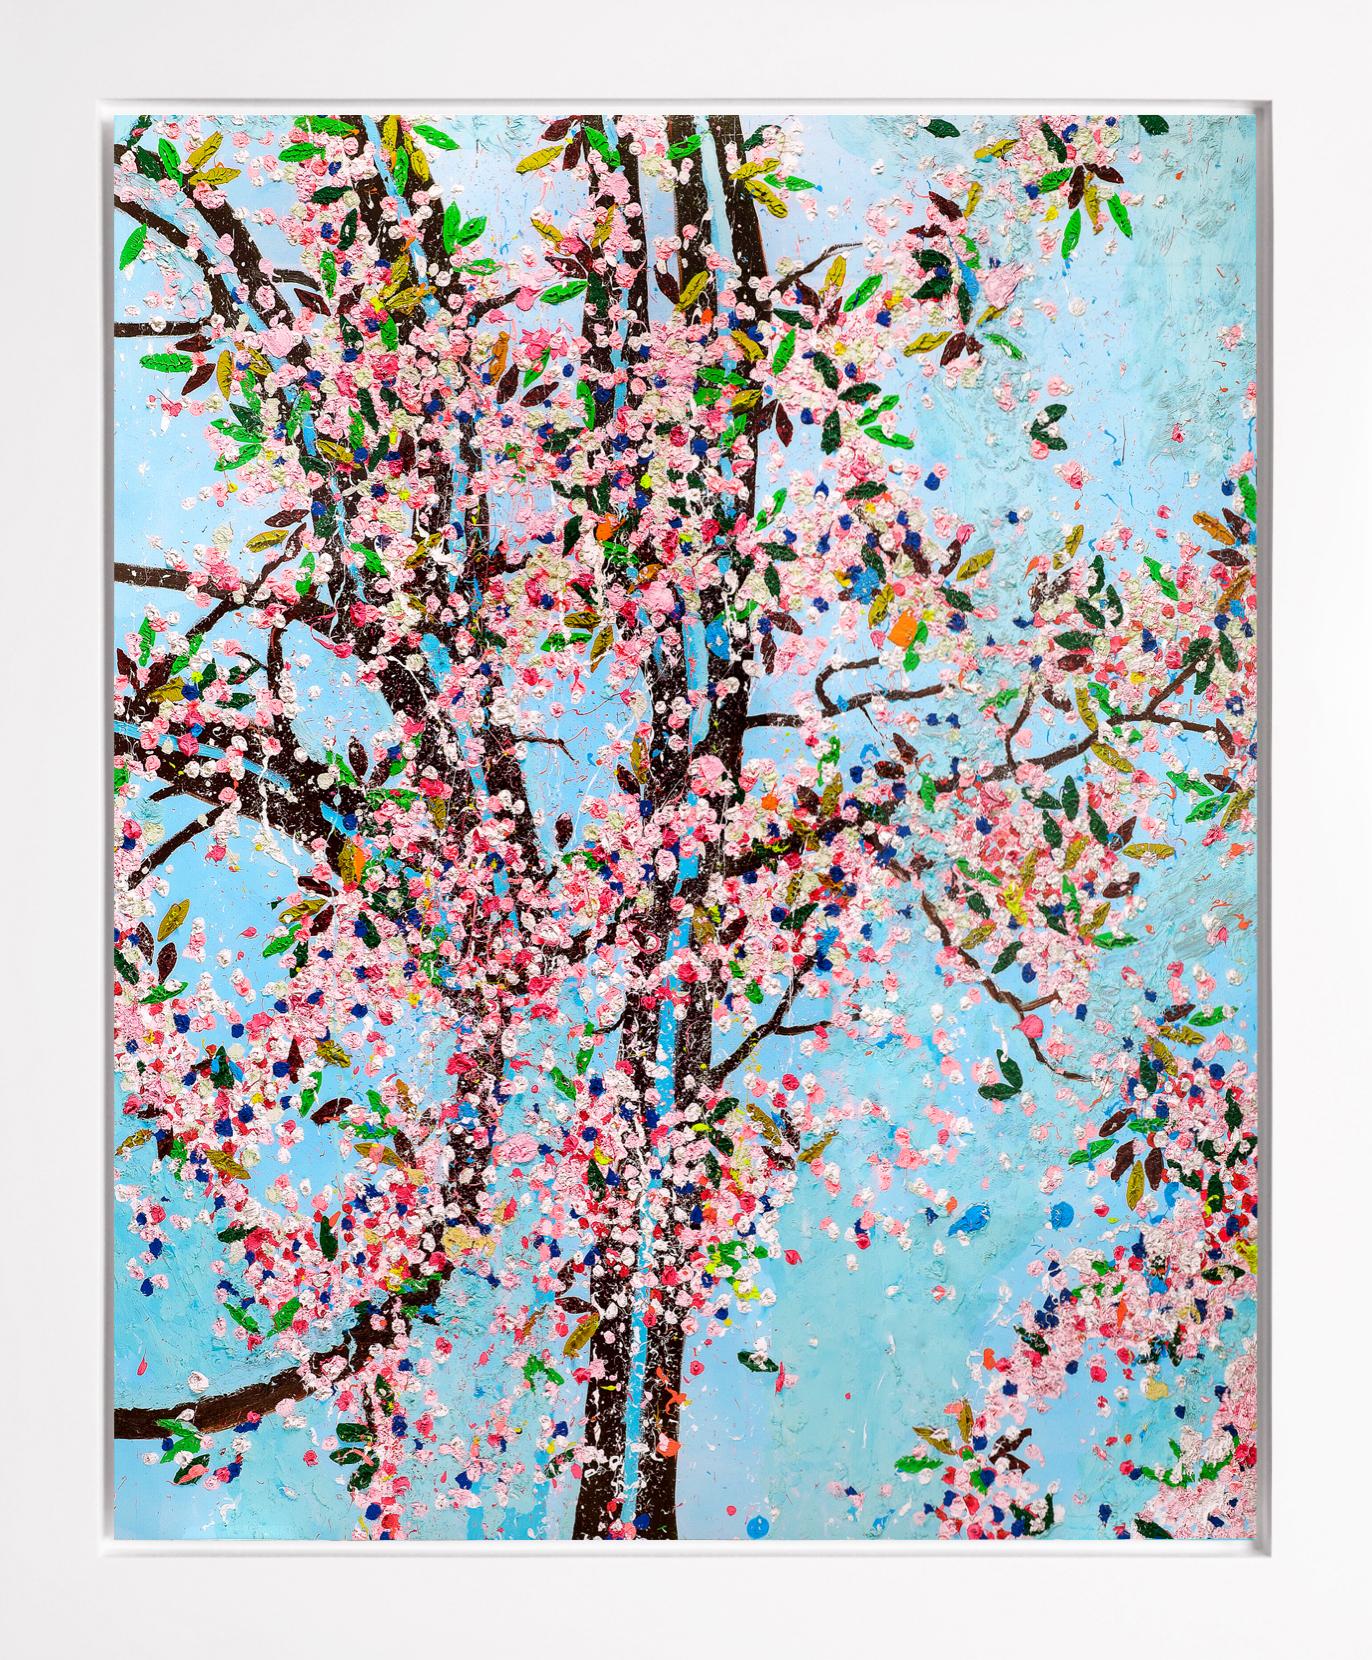 The Virtues 'Courage', Limited Edition 'Cherry Blossom' Landscape - Print by Damien Hirst